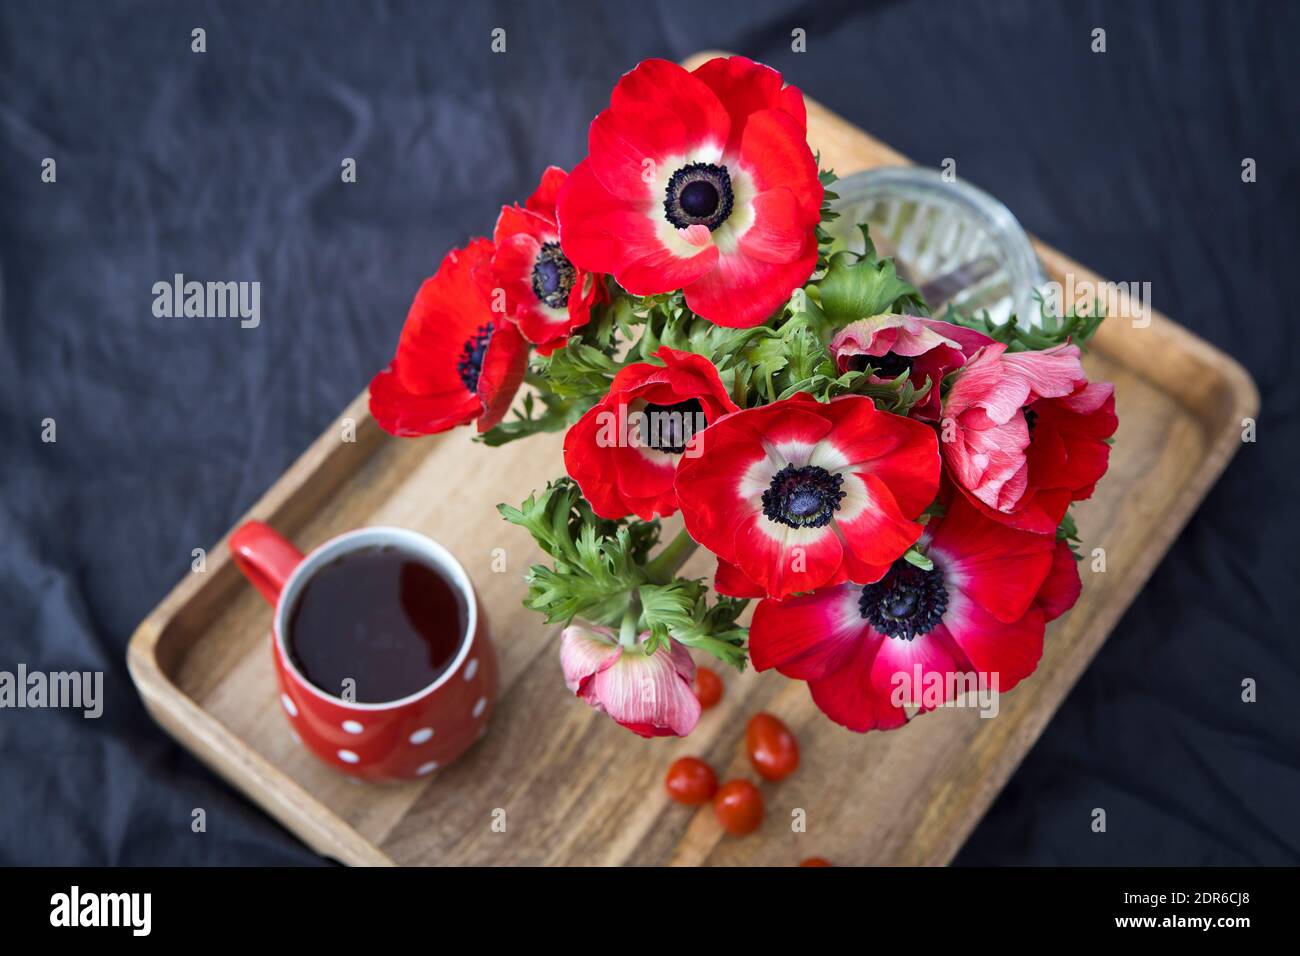 A bouquet of red anemones in a glass vase on a wooden tray on the bed. White polka dot cup with tea. Woolen plaid on a gray sheet. Morning Stock Photo